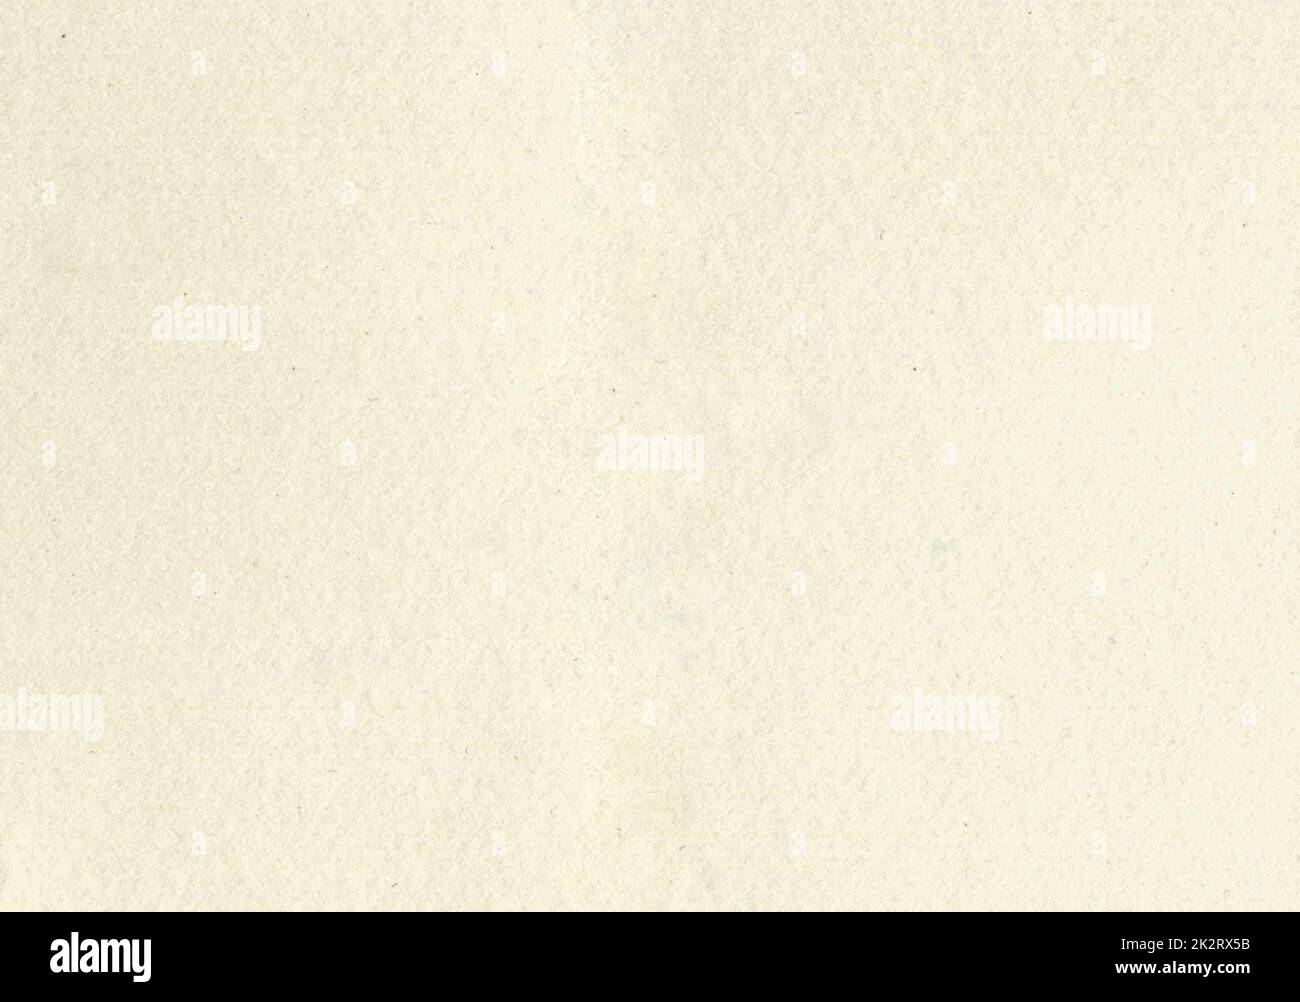 Large image close up paper texture background with aged uncoated fine fiber grain and dust particles sketch water color paper in light beige yellowed color copy space for text wallpapers or designs Stock Photo